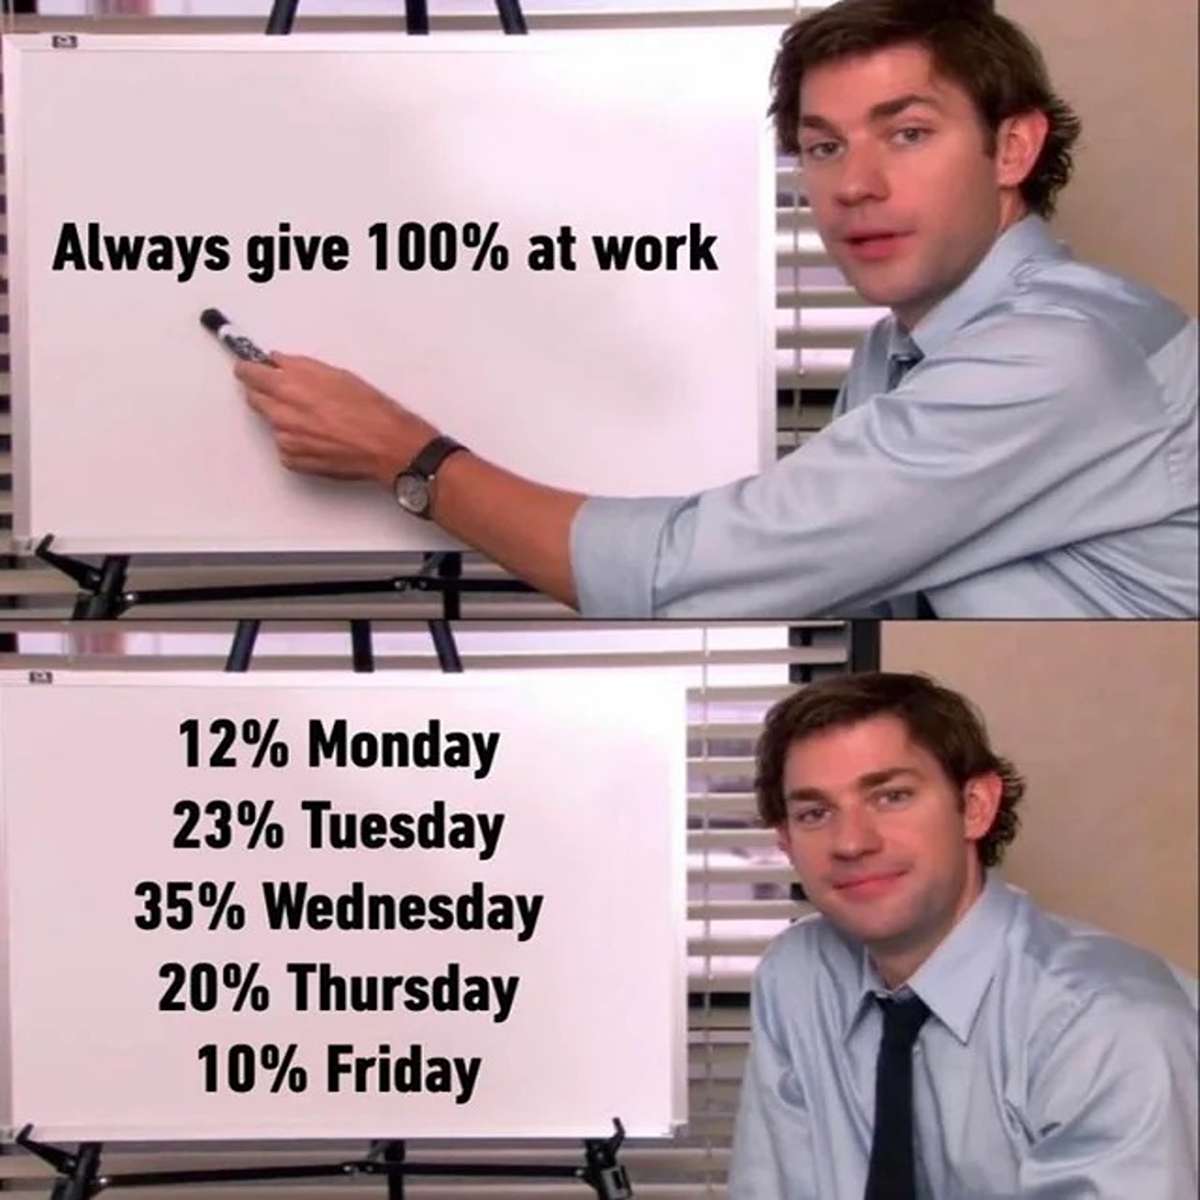 dank memes - Always give 100% at work 12% Monday 23% Tuesday 35% Wednesday 20% Thursday 10% Friday